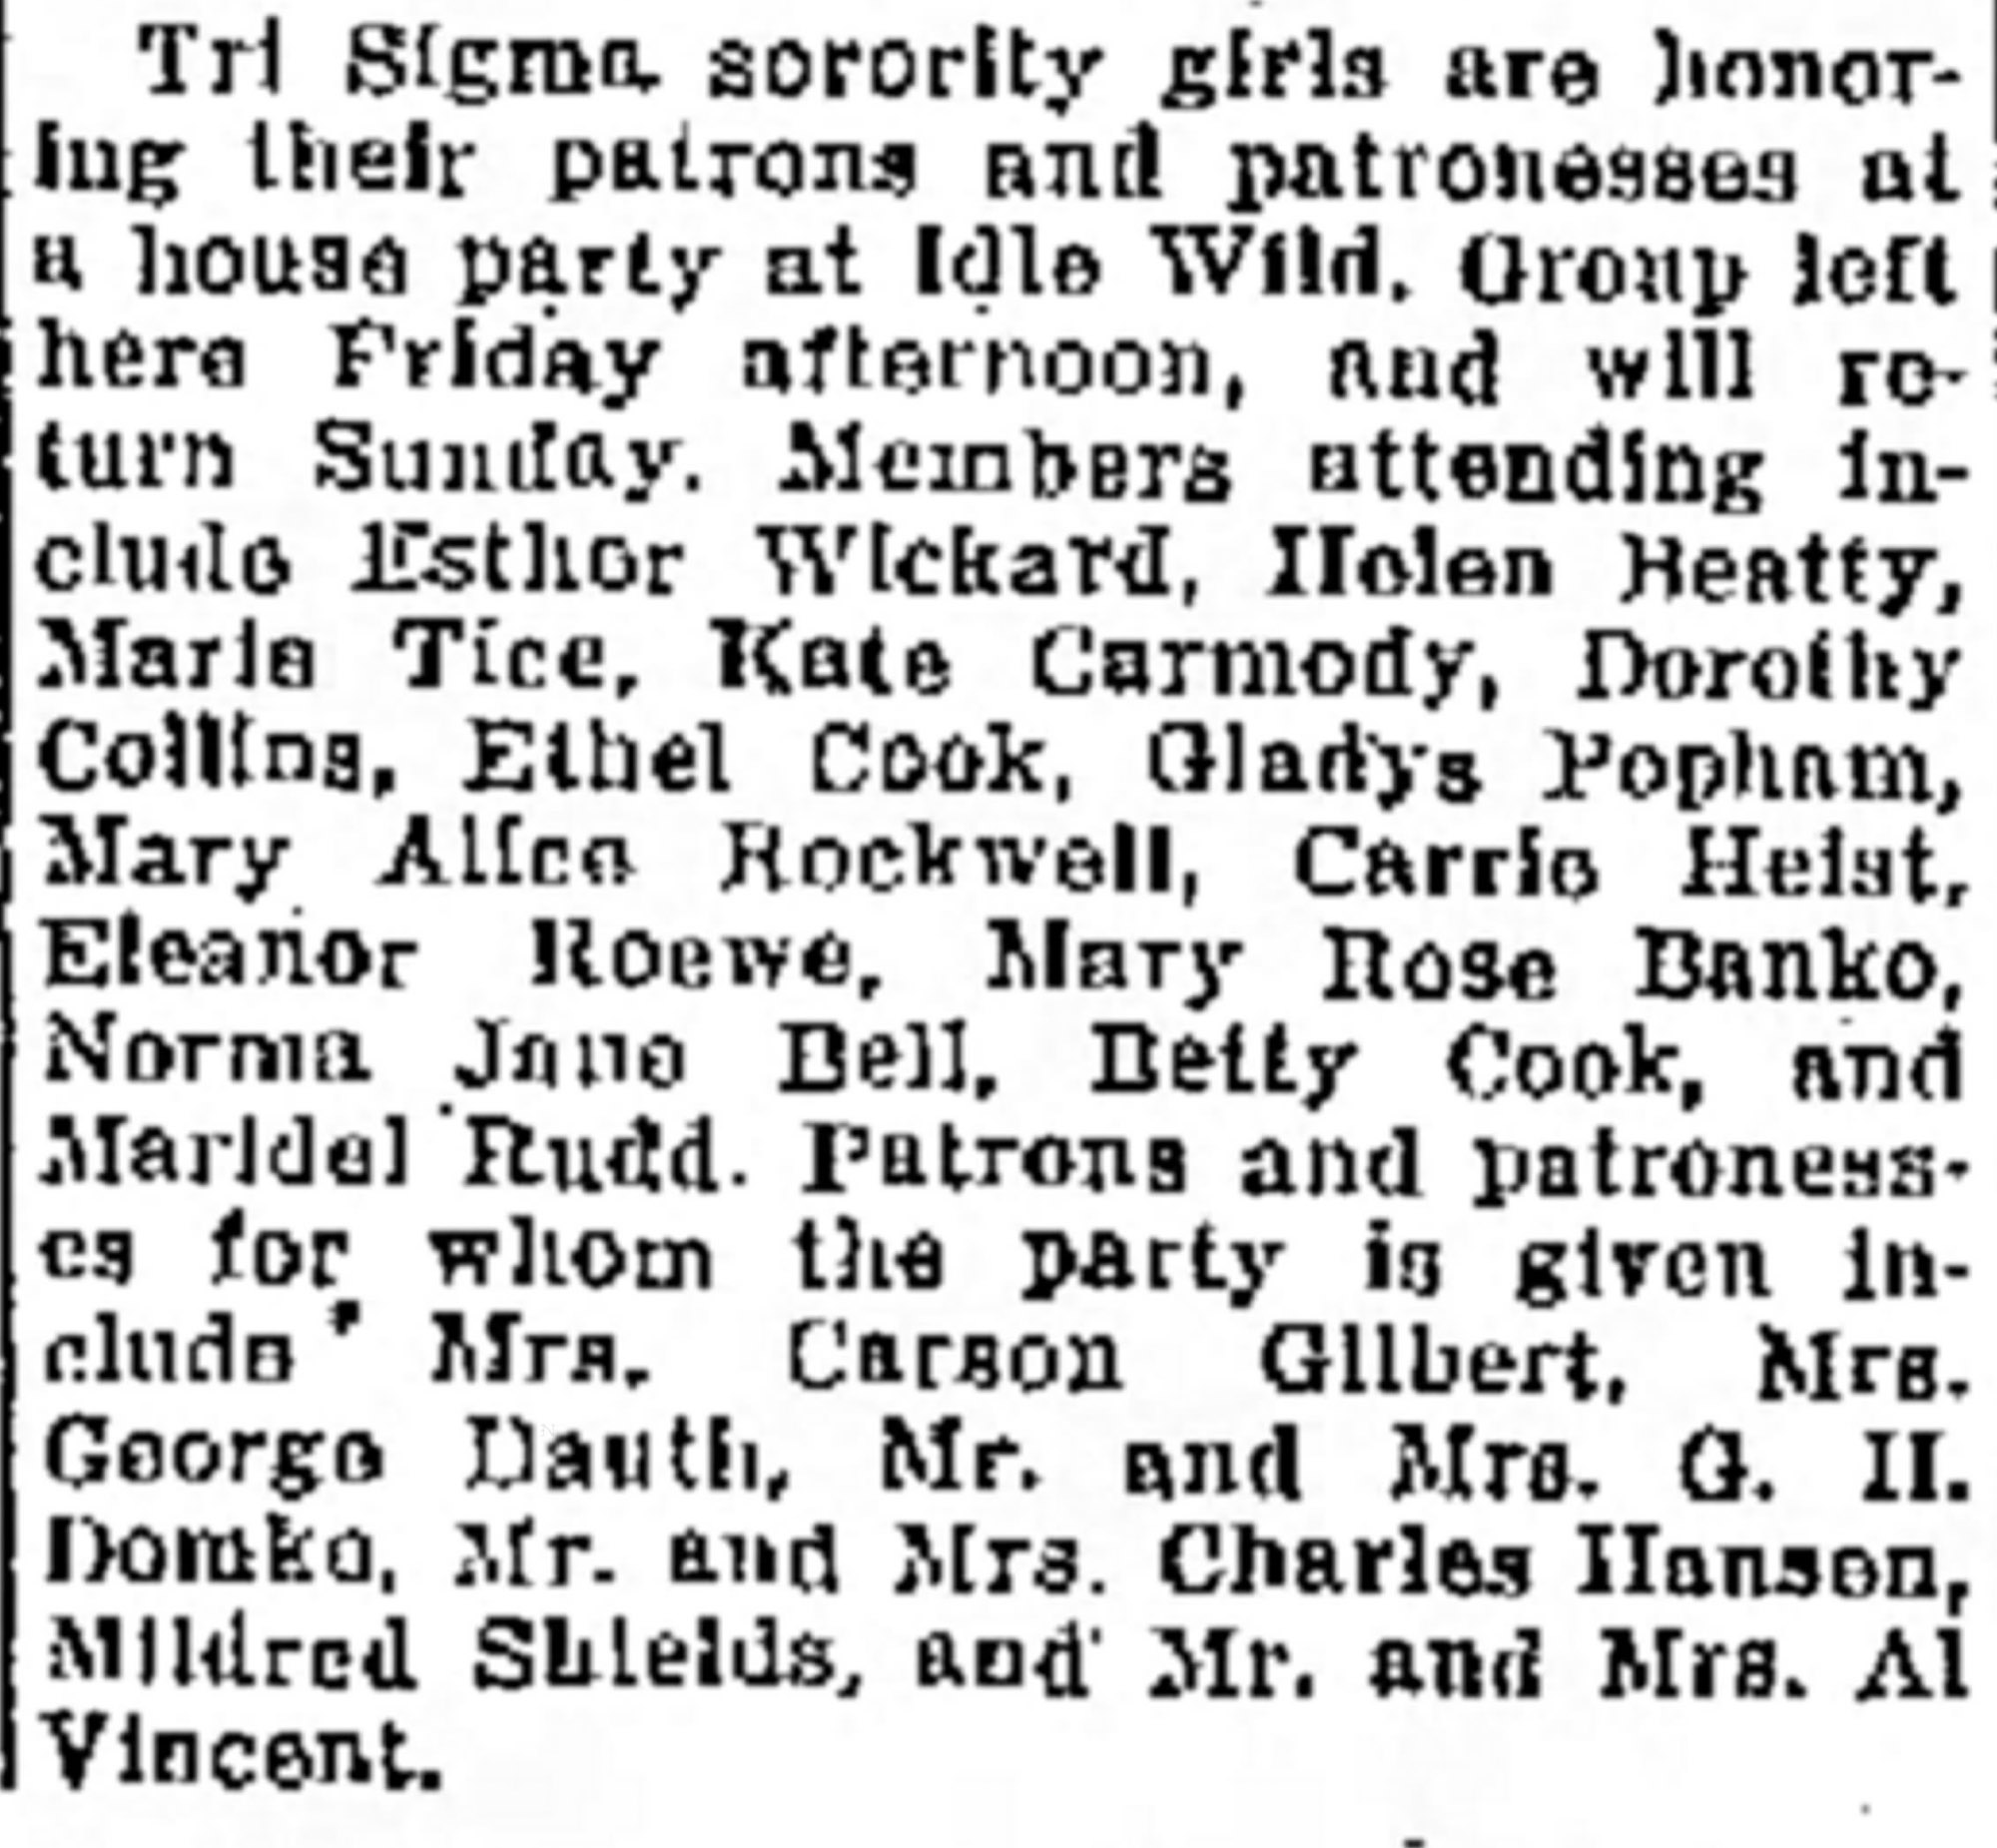 Dauth Family Archive - 1933-05-27 - Greeley Daily Tribune - Florence Dauth With Tri Sigma at Idlewild Lodge